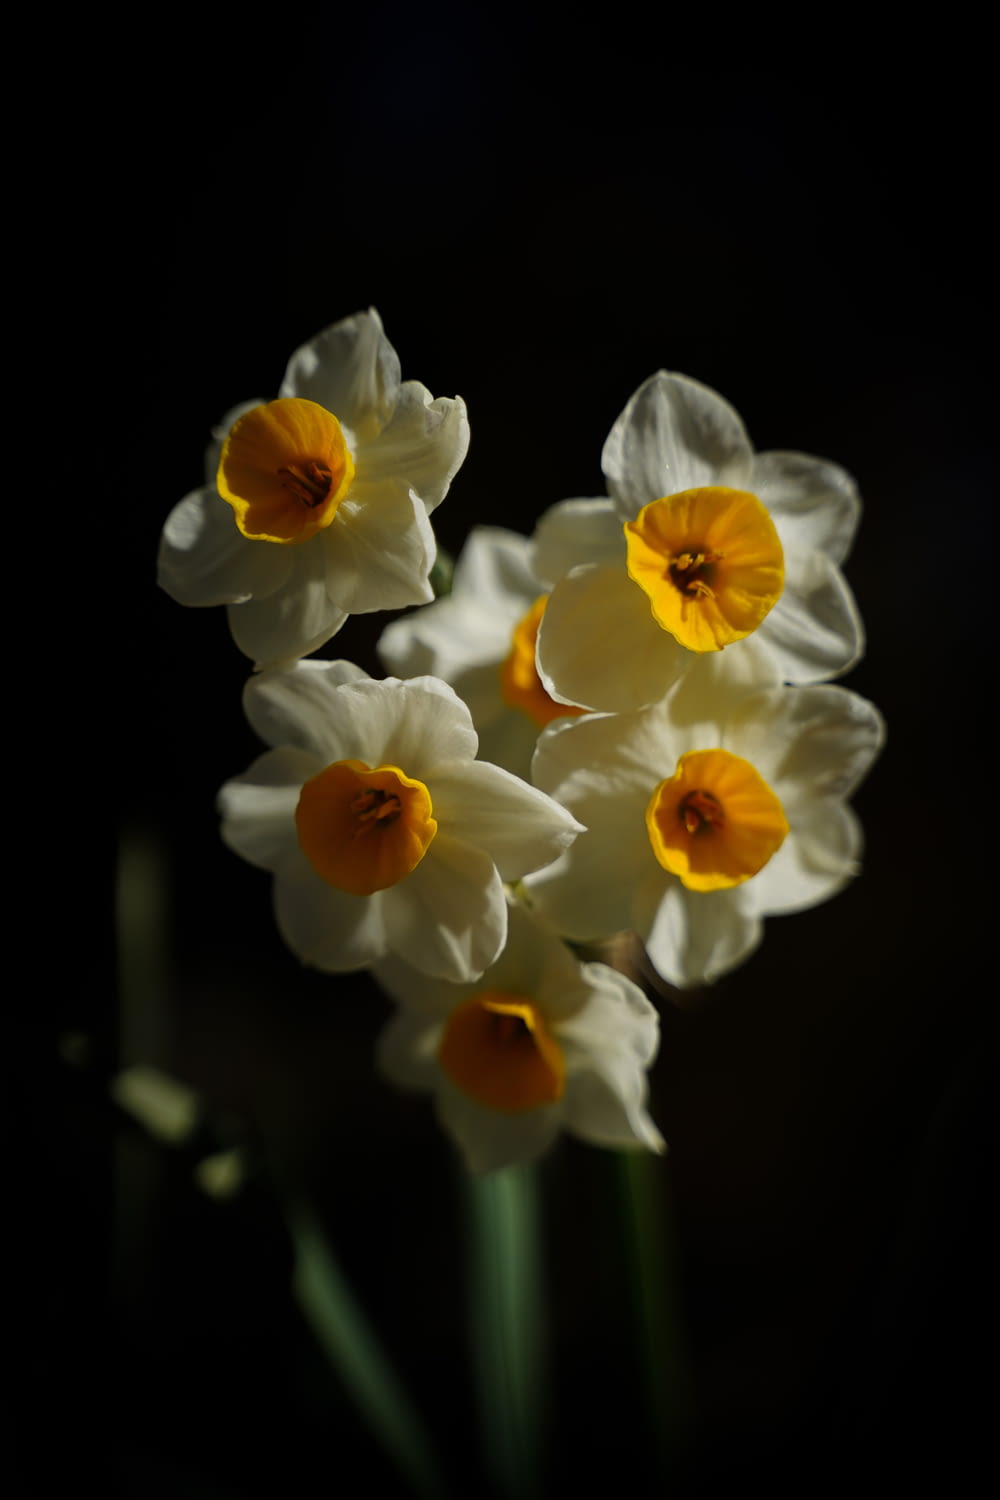 a bunch of white and yellow flowers in a vase